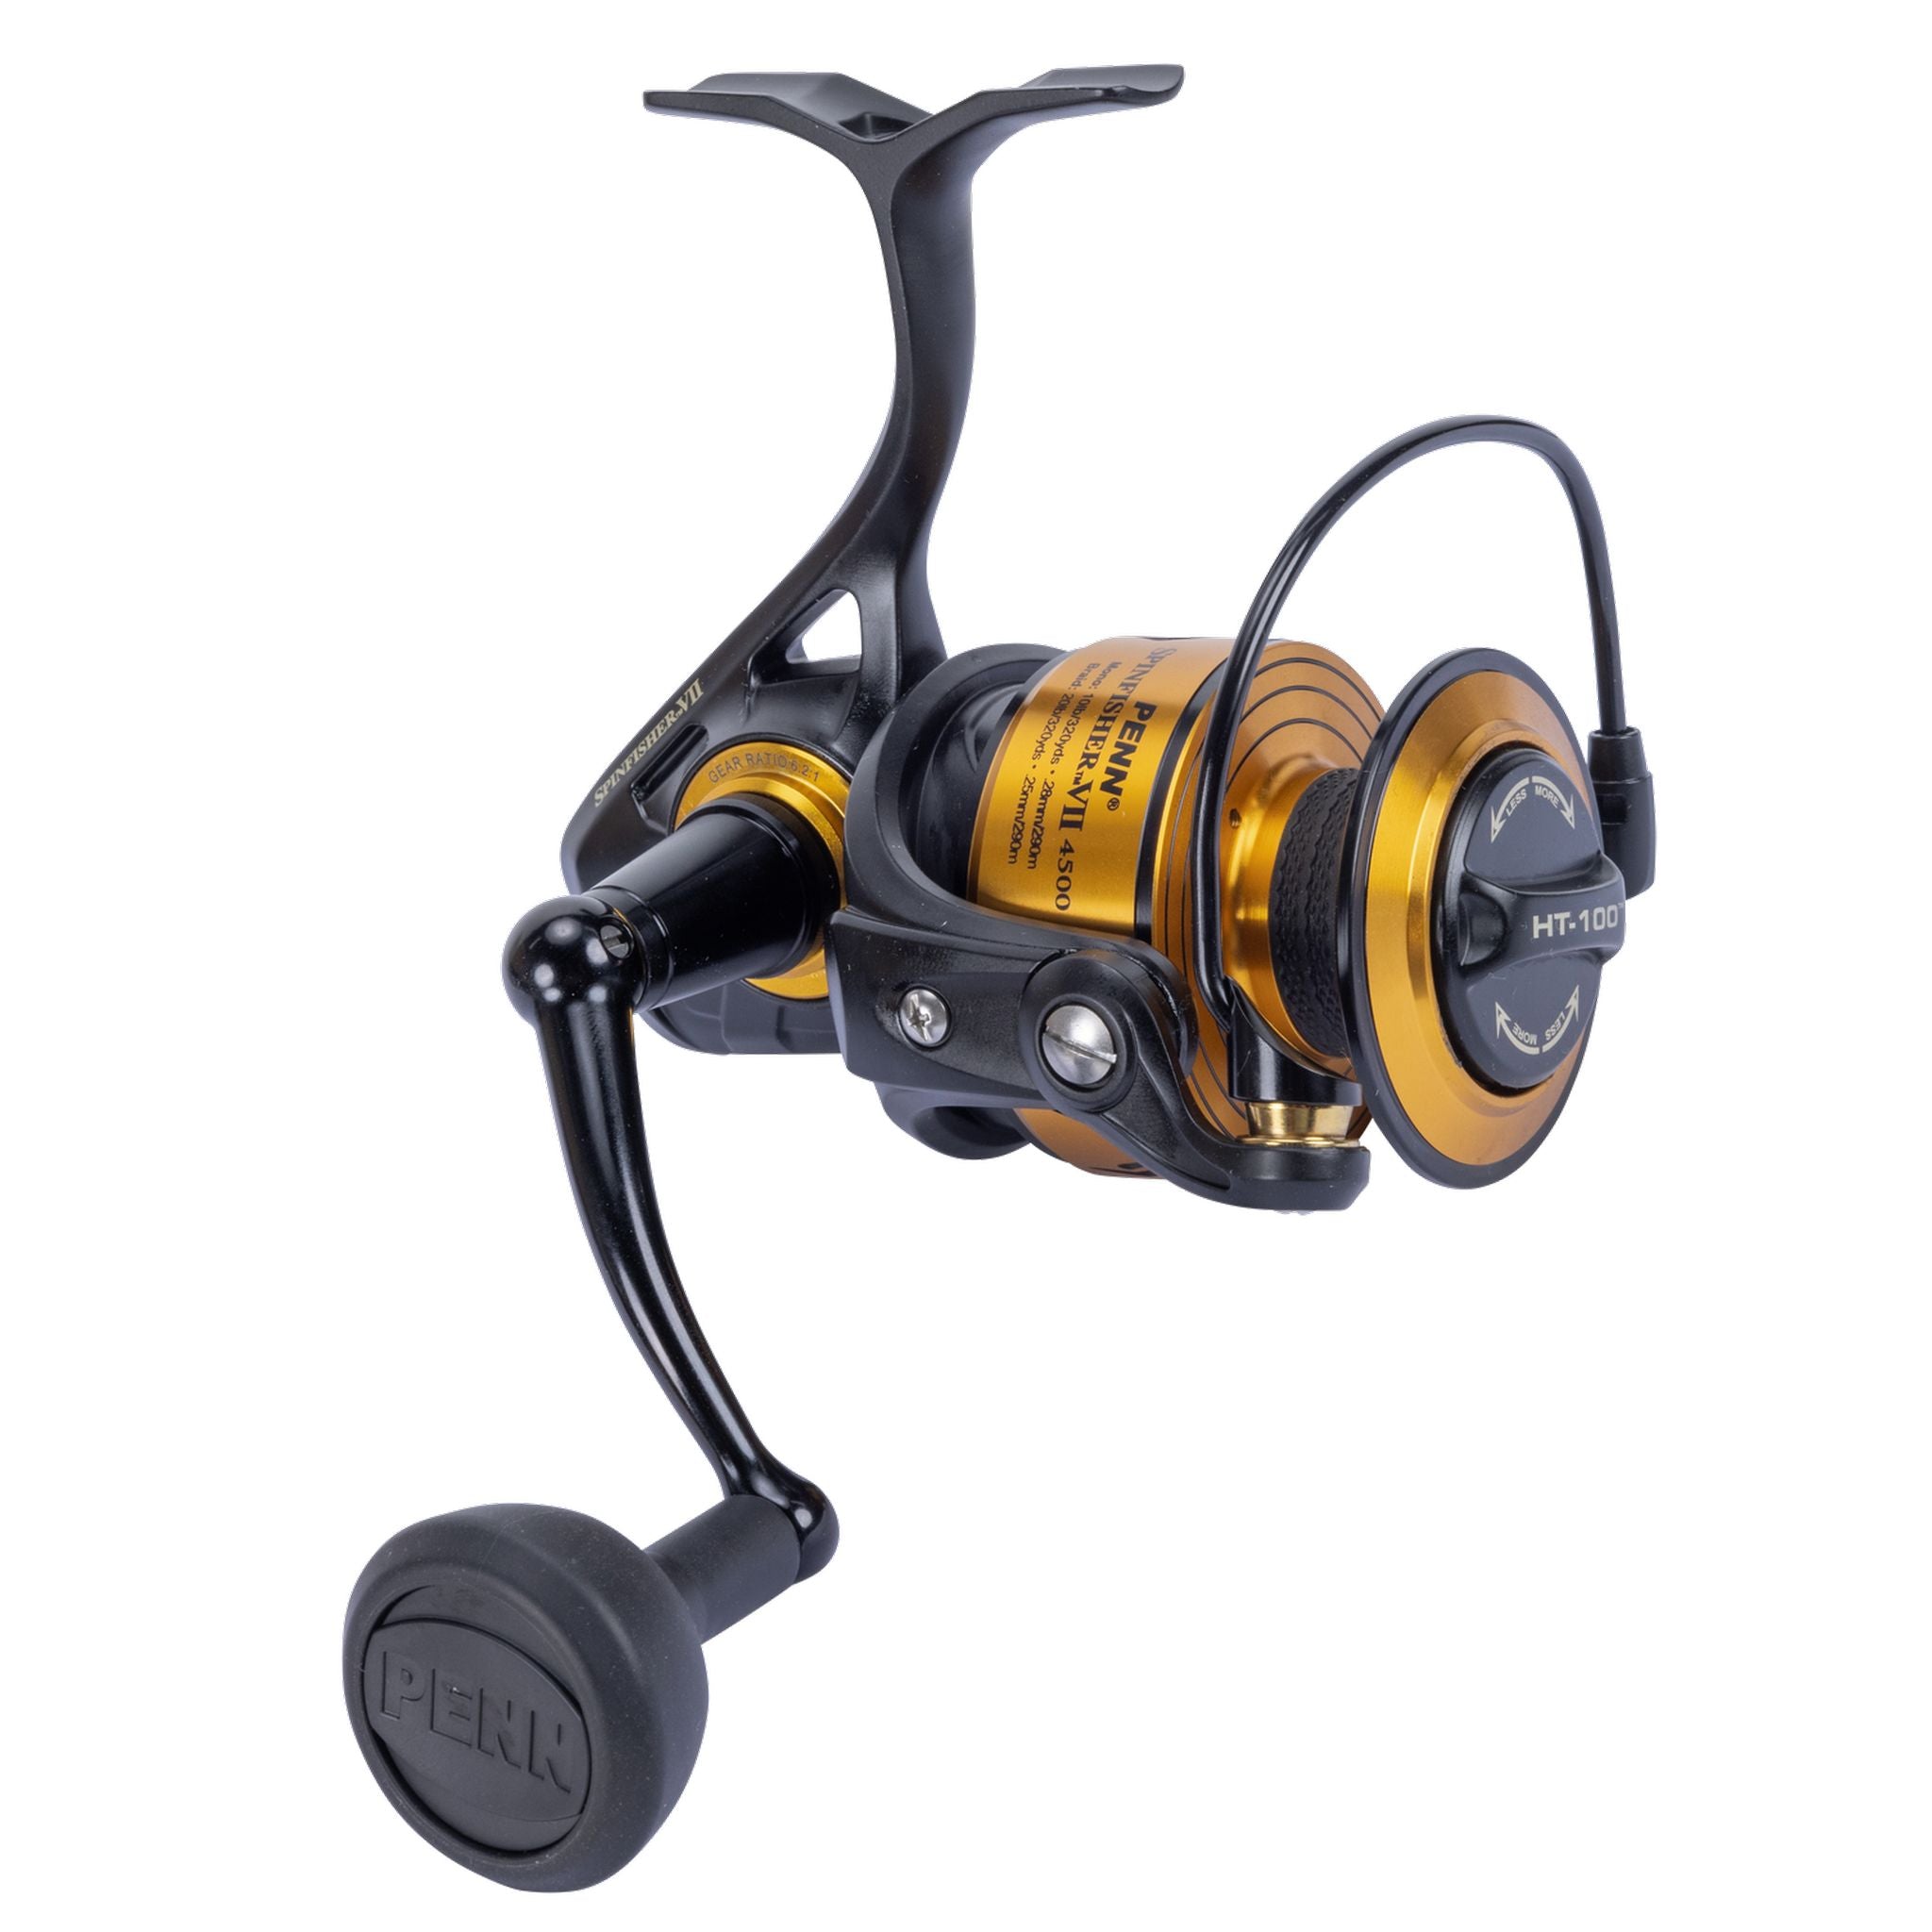 Penn Spinfisher vii 4500 SP BX ANZ Spin Reel